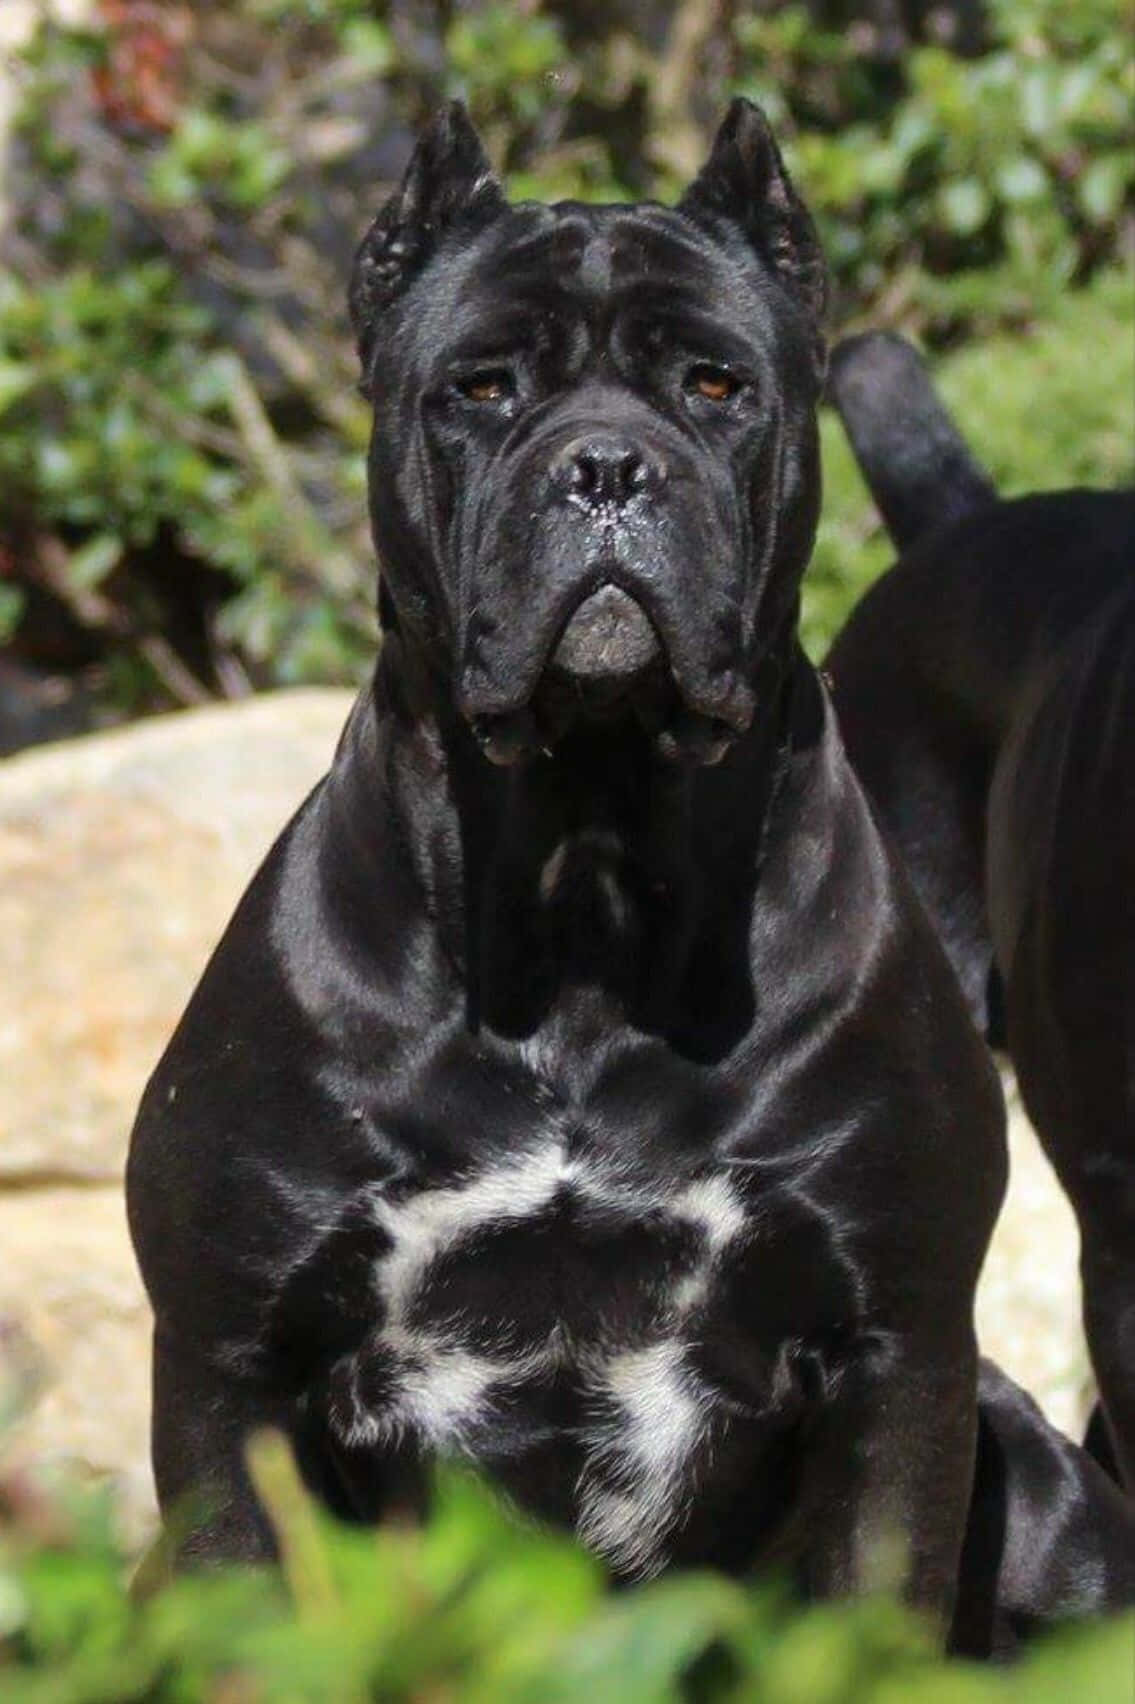 Stunning Cane Corso against a rustic wooden background